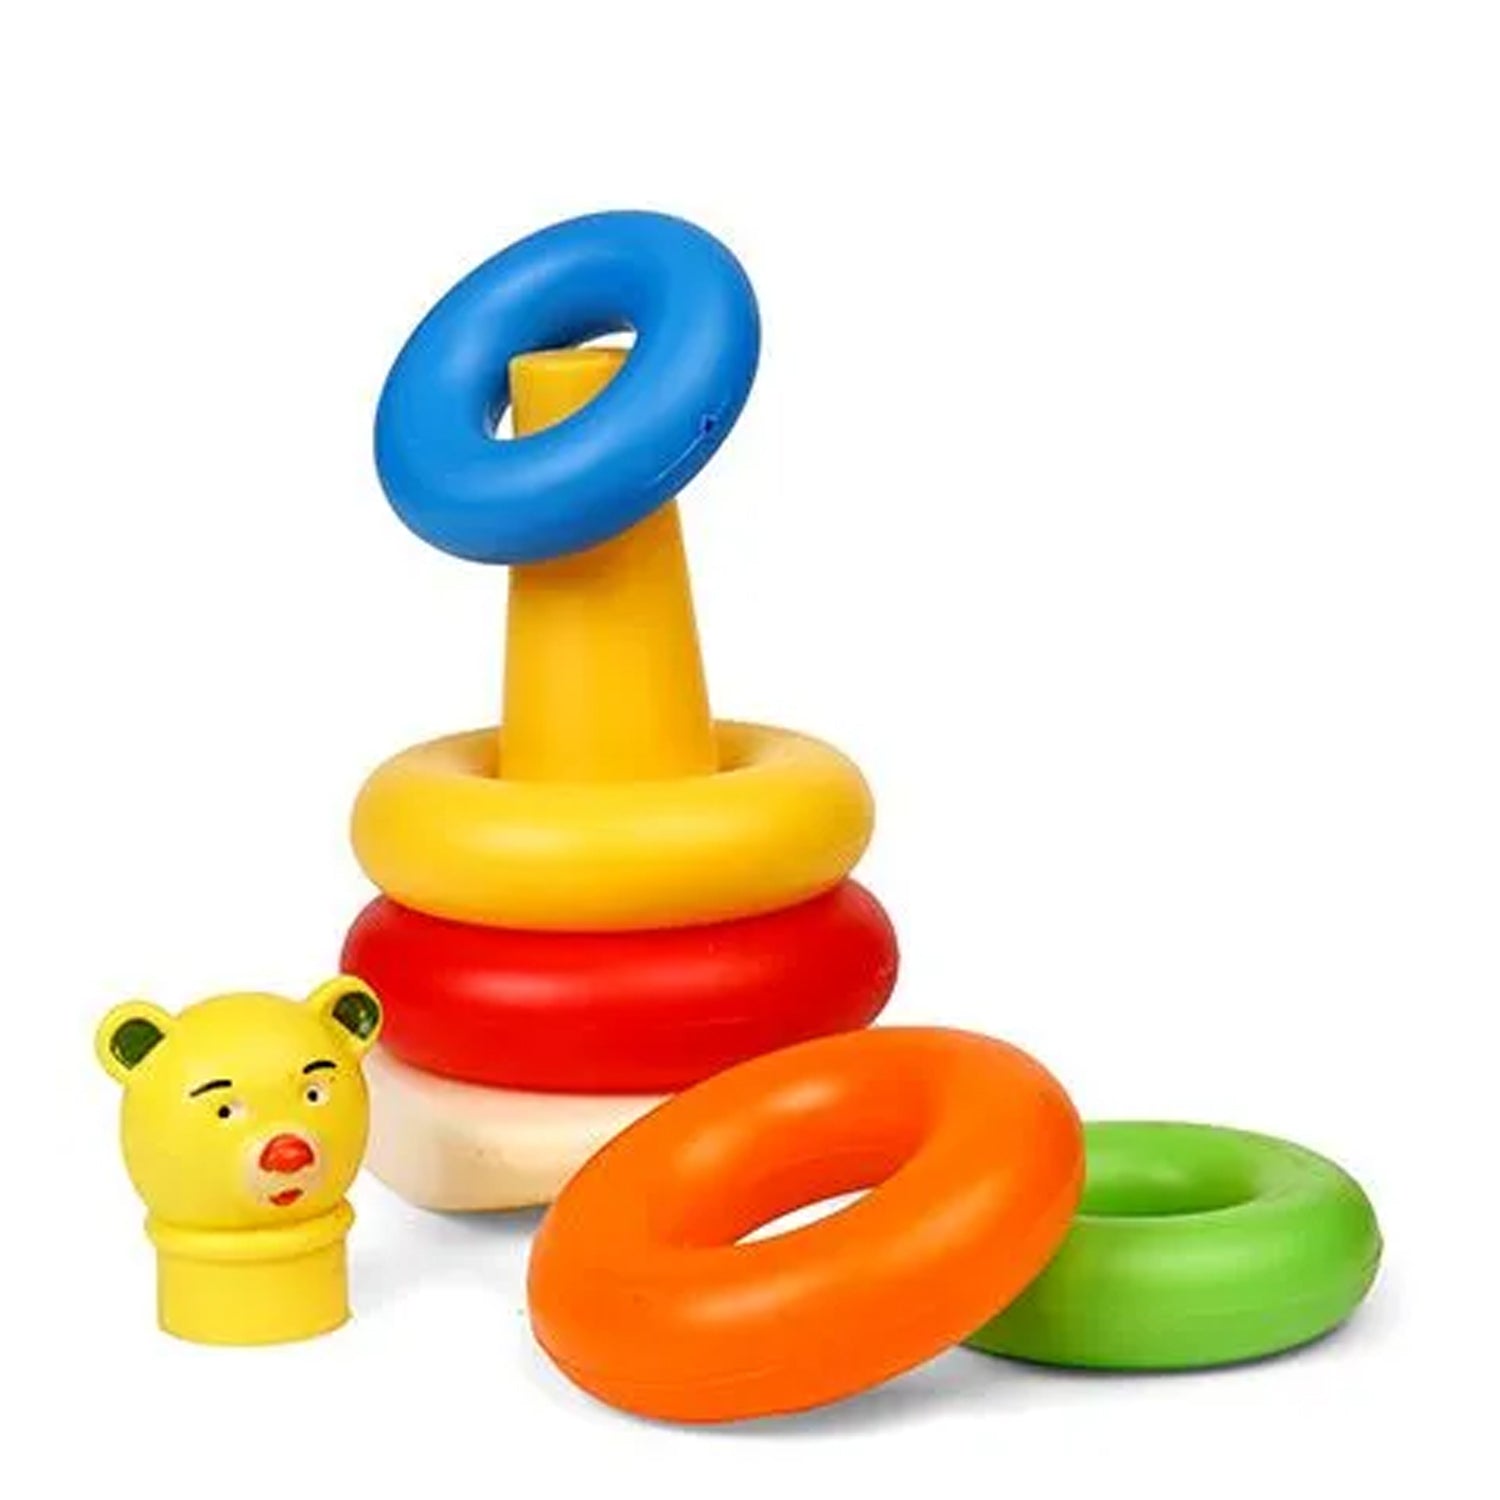 8017 Plastic Baby Kids Teddy Stacking Ring Jumbo Stack Up Educational Toy 5pc DeoDap